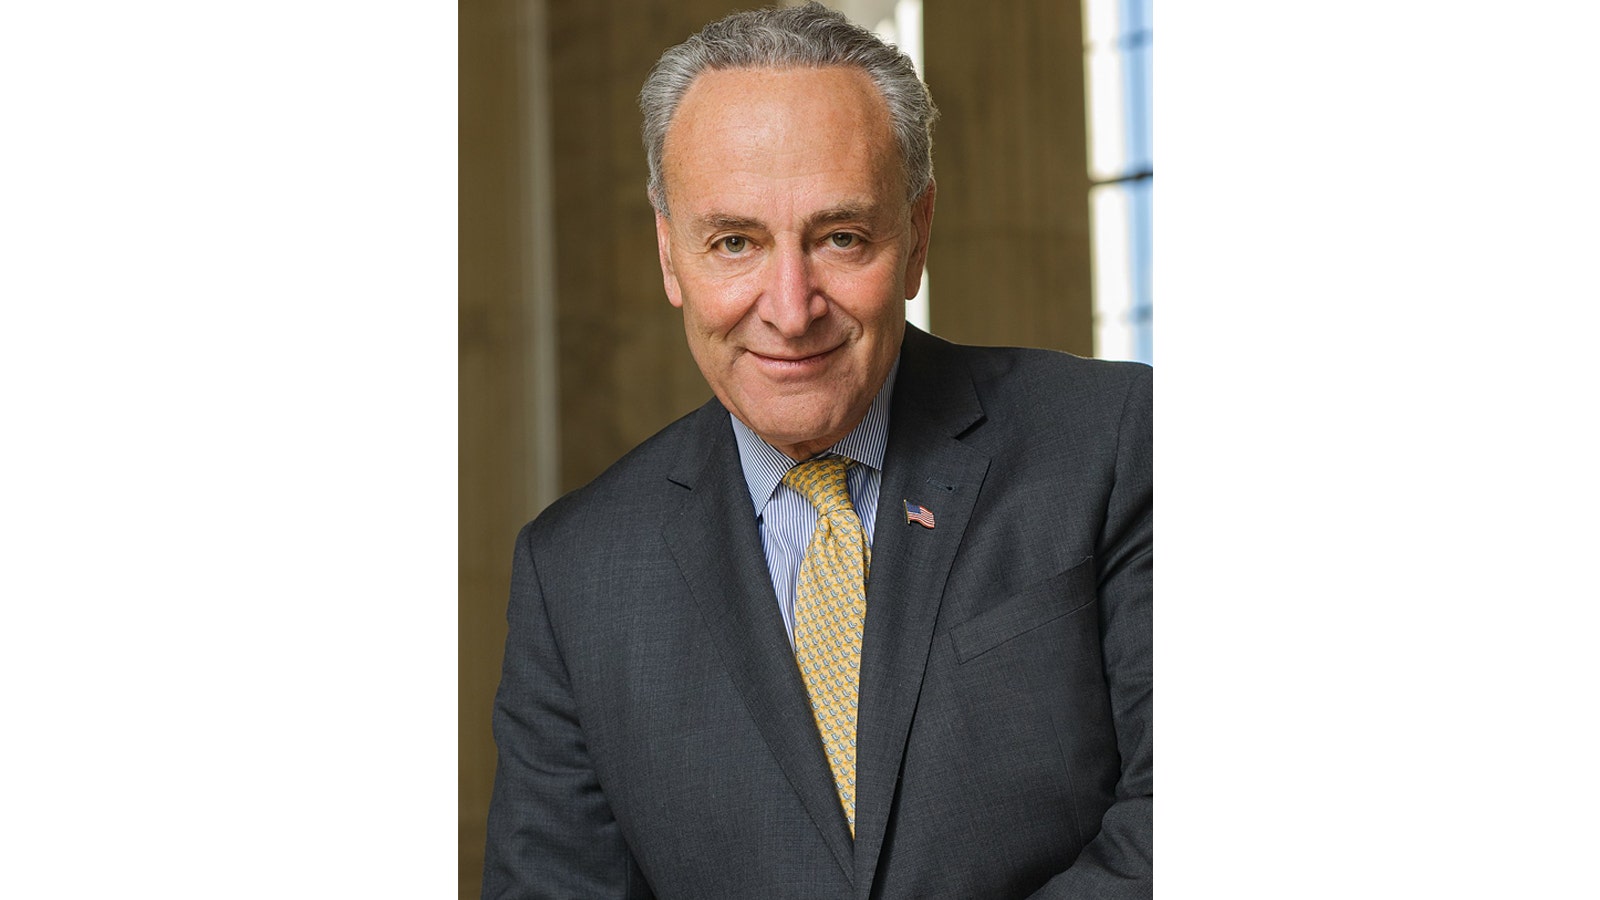 Schumer Touts 'Overwhelming Evidence' That Cannabis Legalization Doesn't Increase Crime